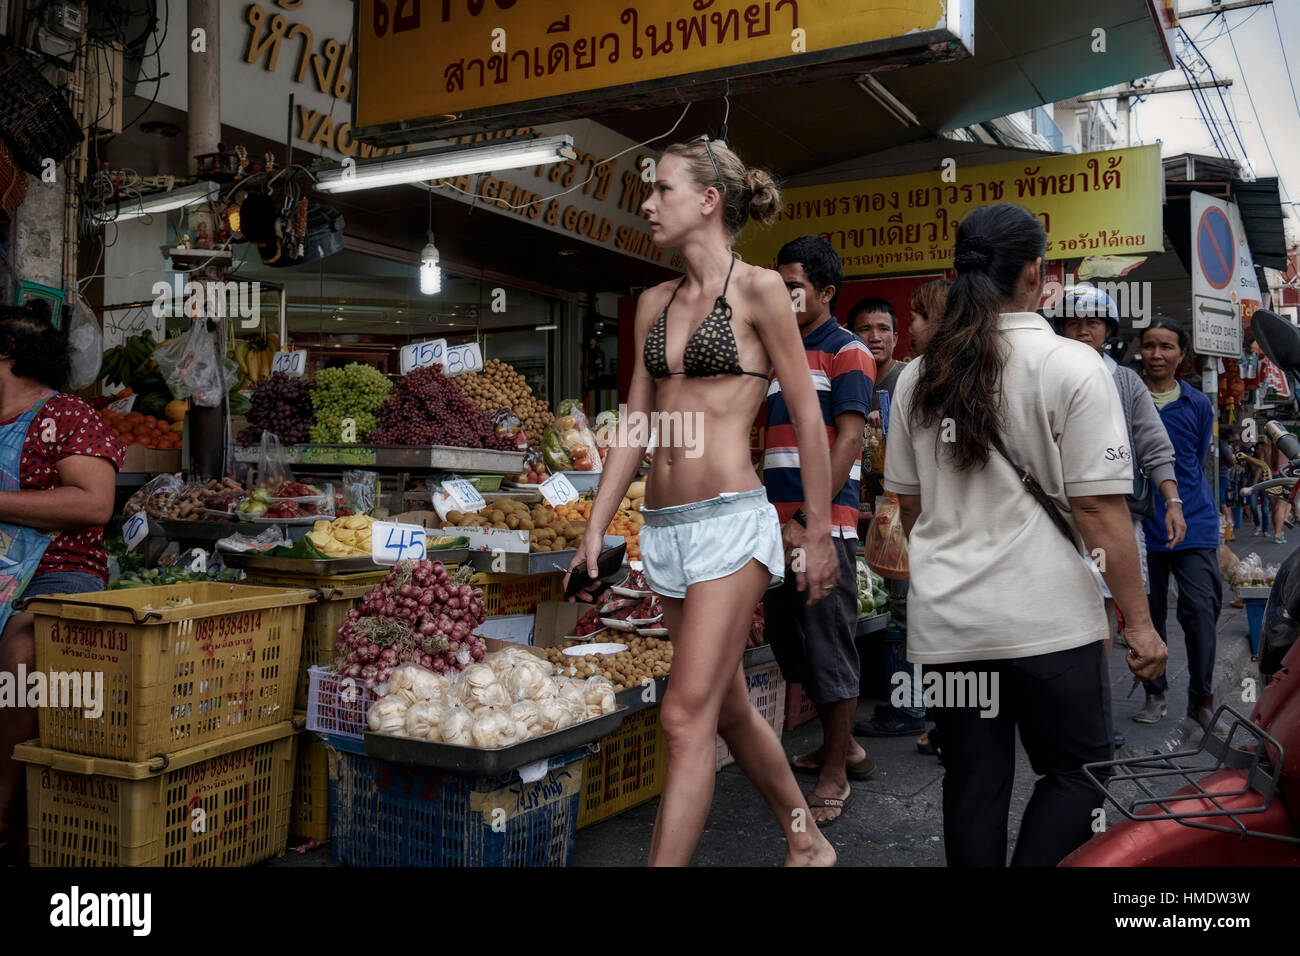 Inappropriately attired and Scantily dressed woman street shopping. Thailand Southeast Asia Stock Photo